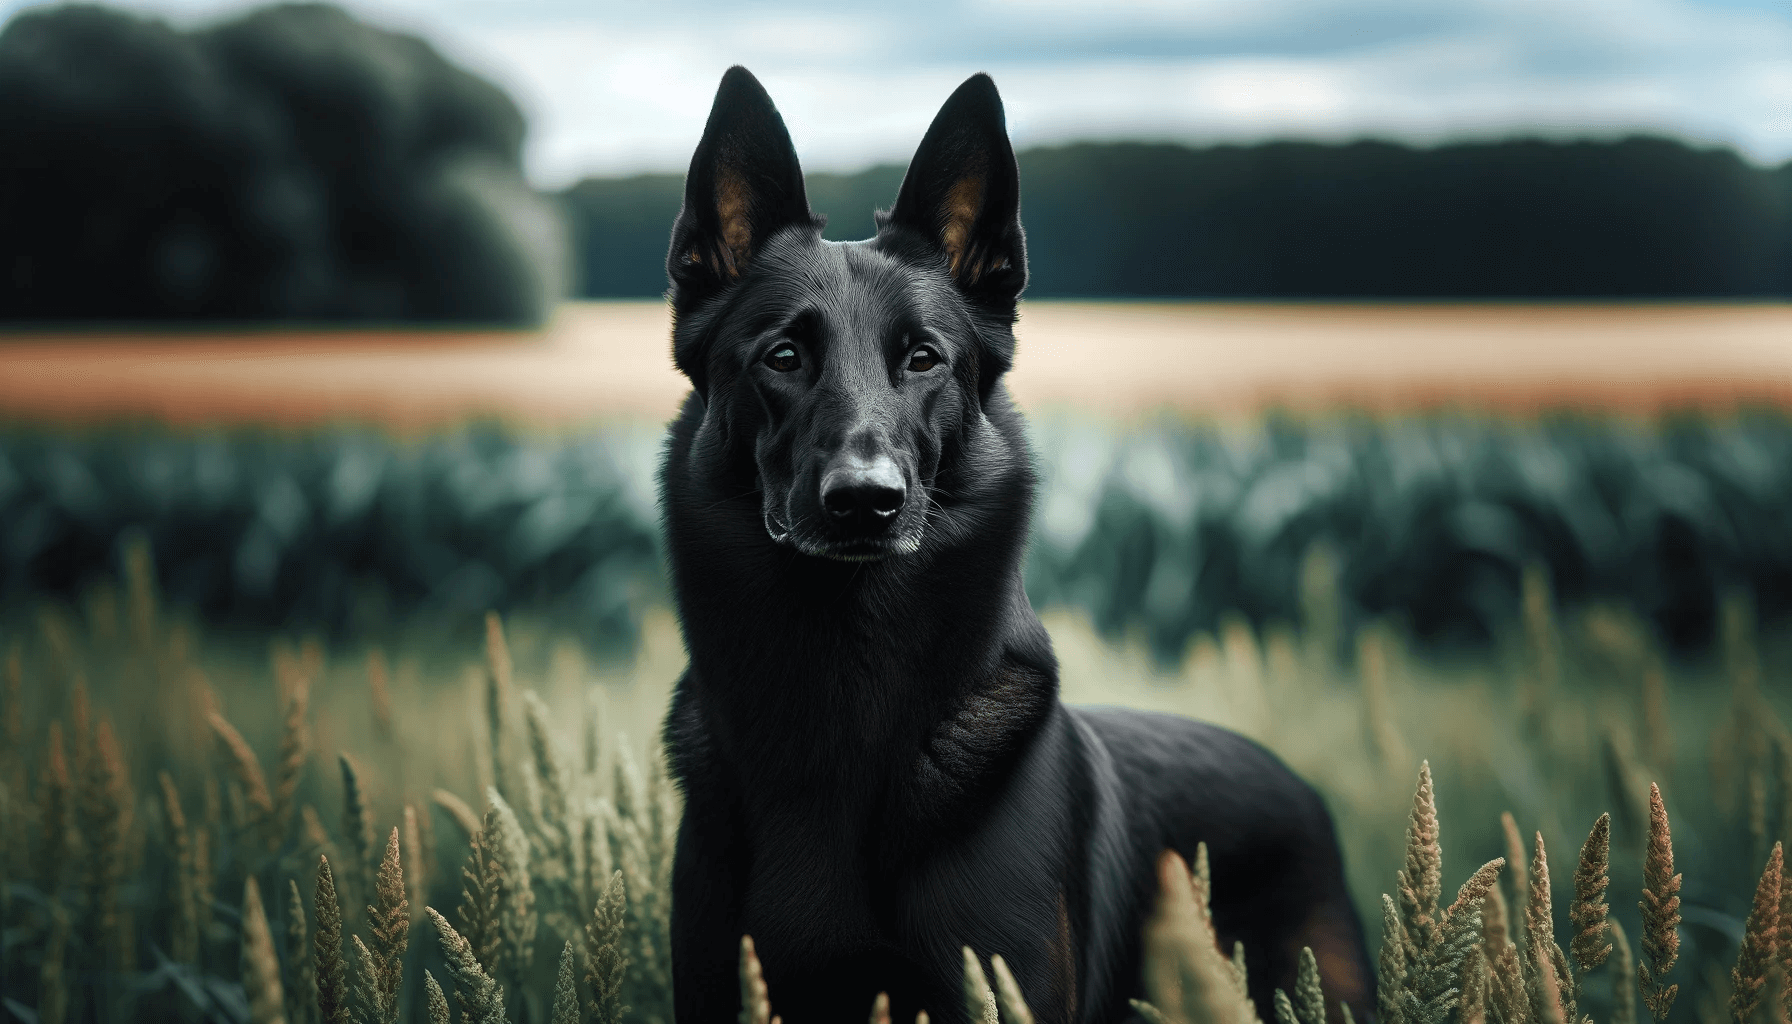 Rare Black Belgian Malinois standing alert in a field with its body in profile and head turned towards the camera, showing the breed's attentive nature.